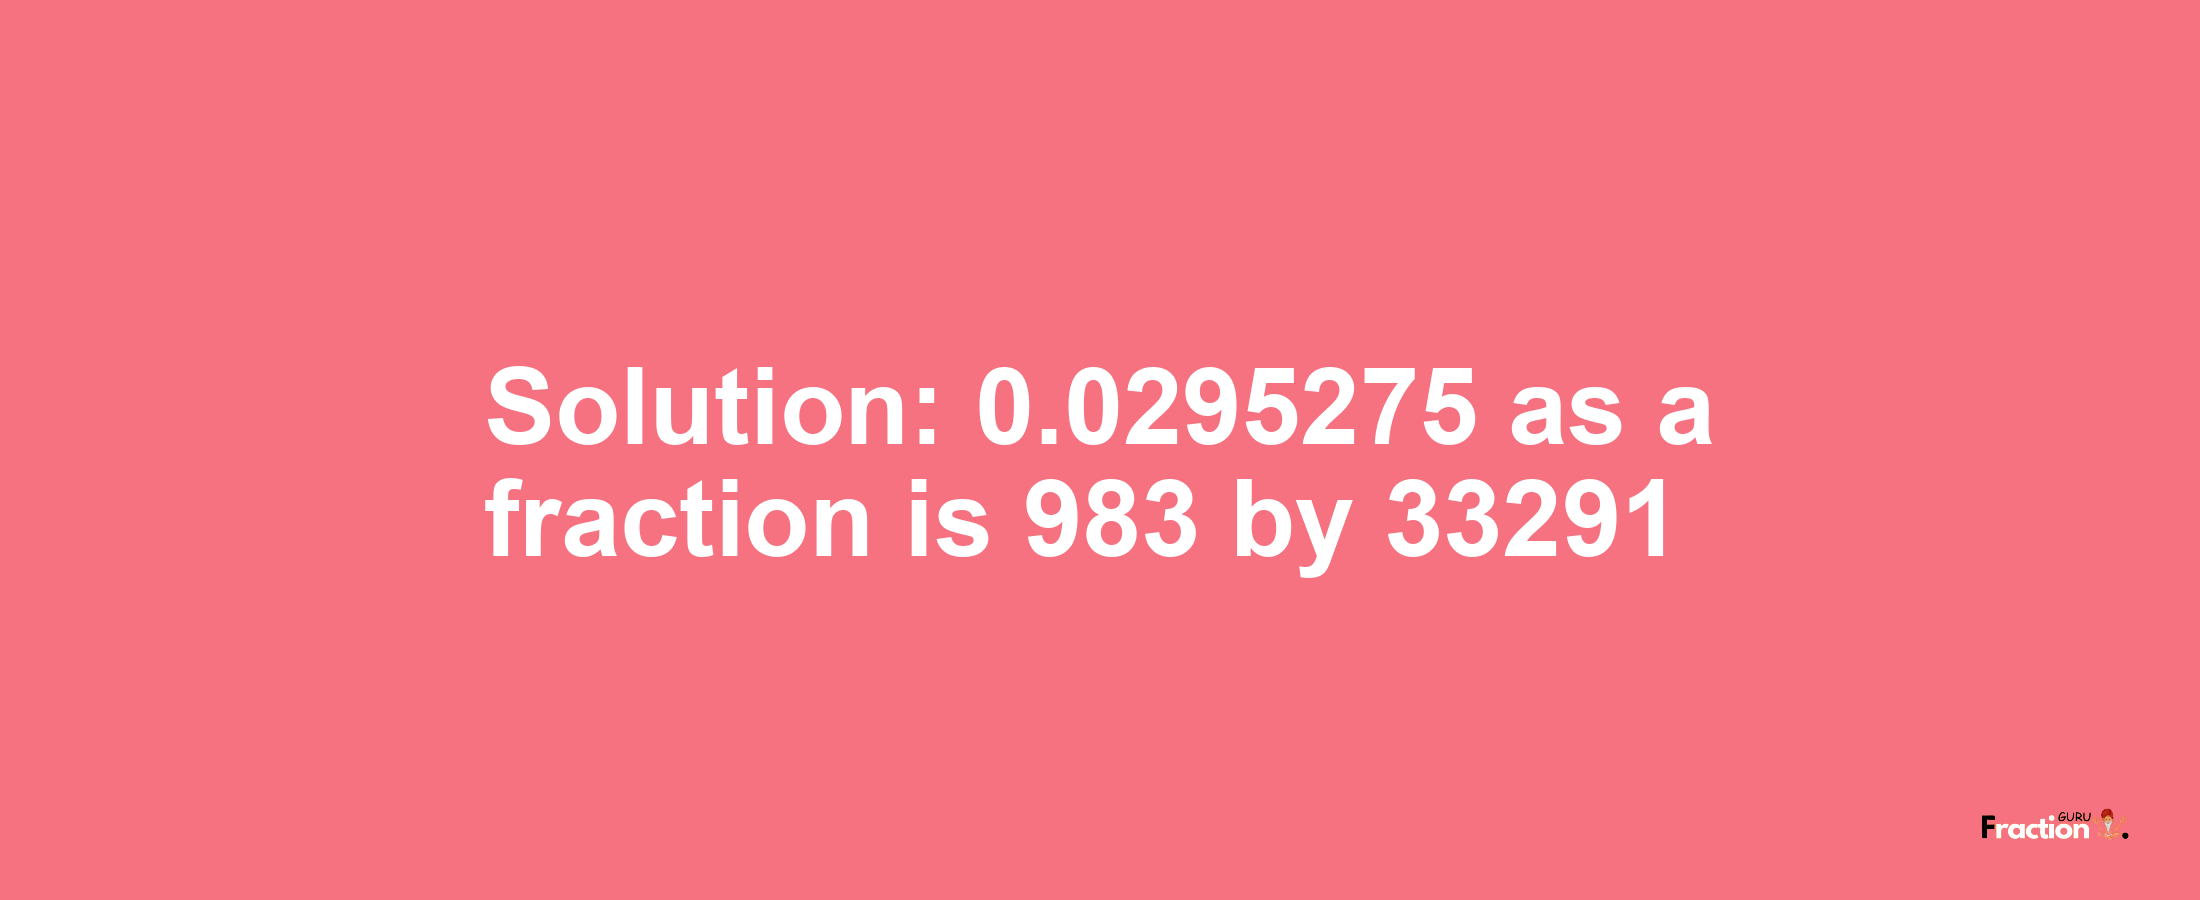 Solution:0.0295275 as a fraction is 983/33291